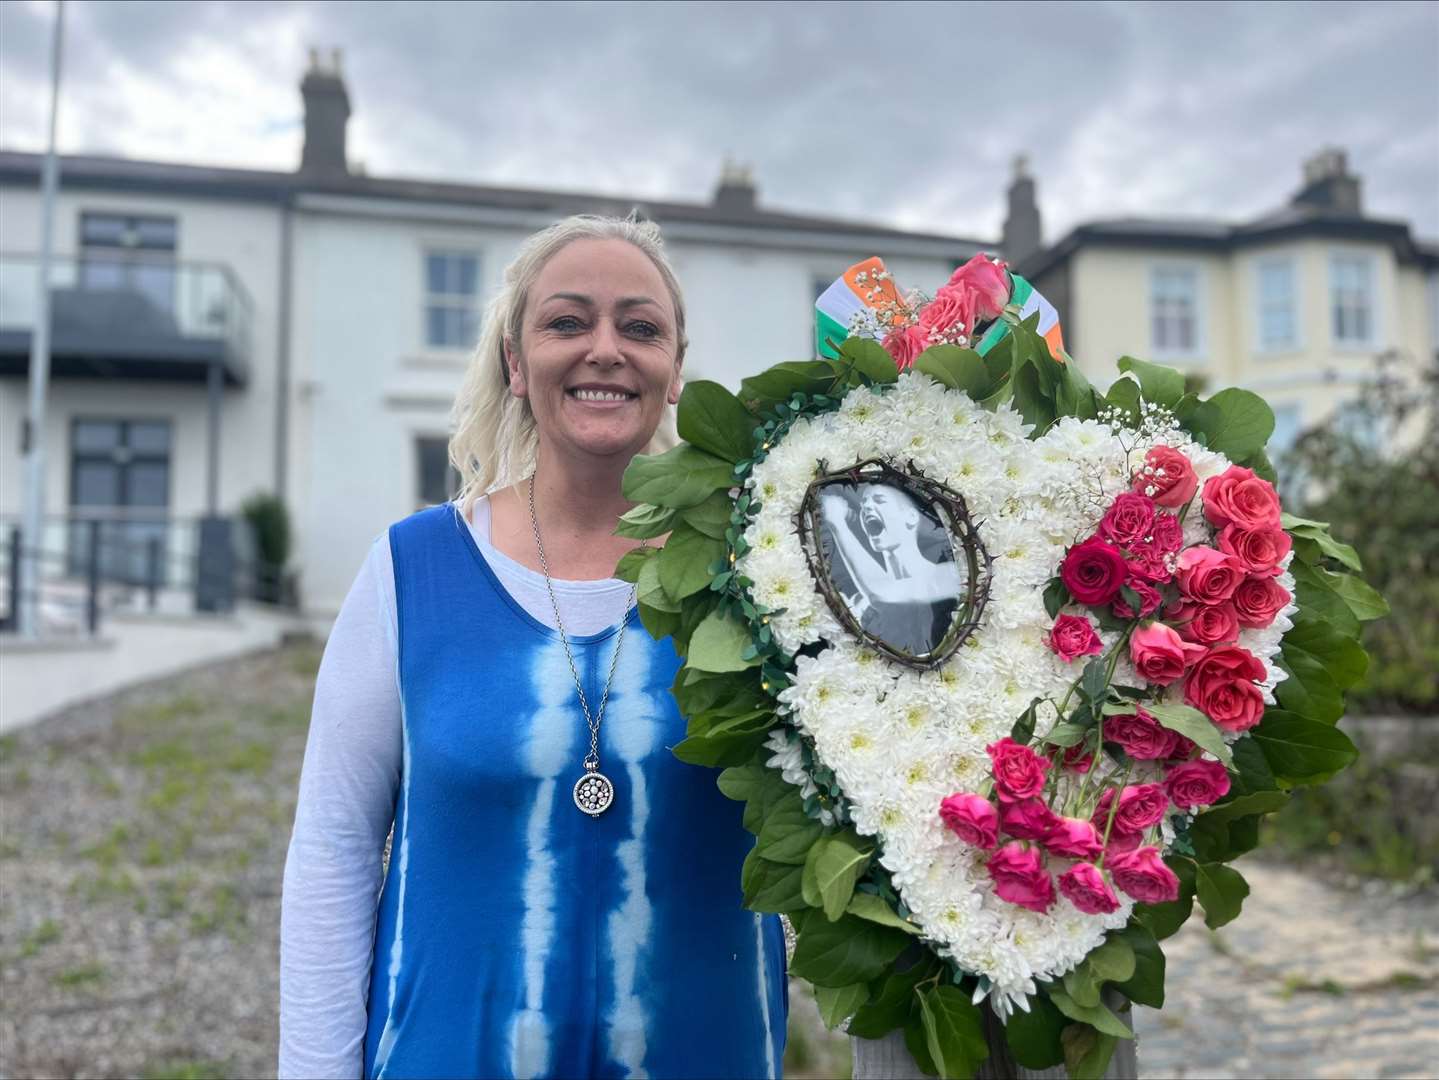 Karen Kehoe with a wreath she designed for Sinead O’Connor (Claudia Savage/PA)